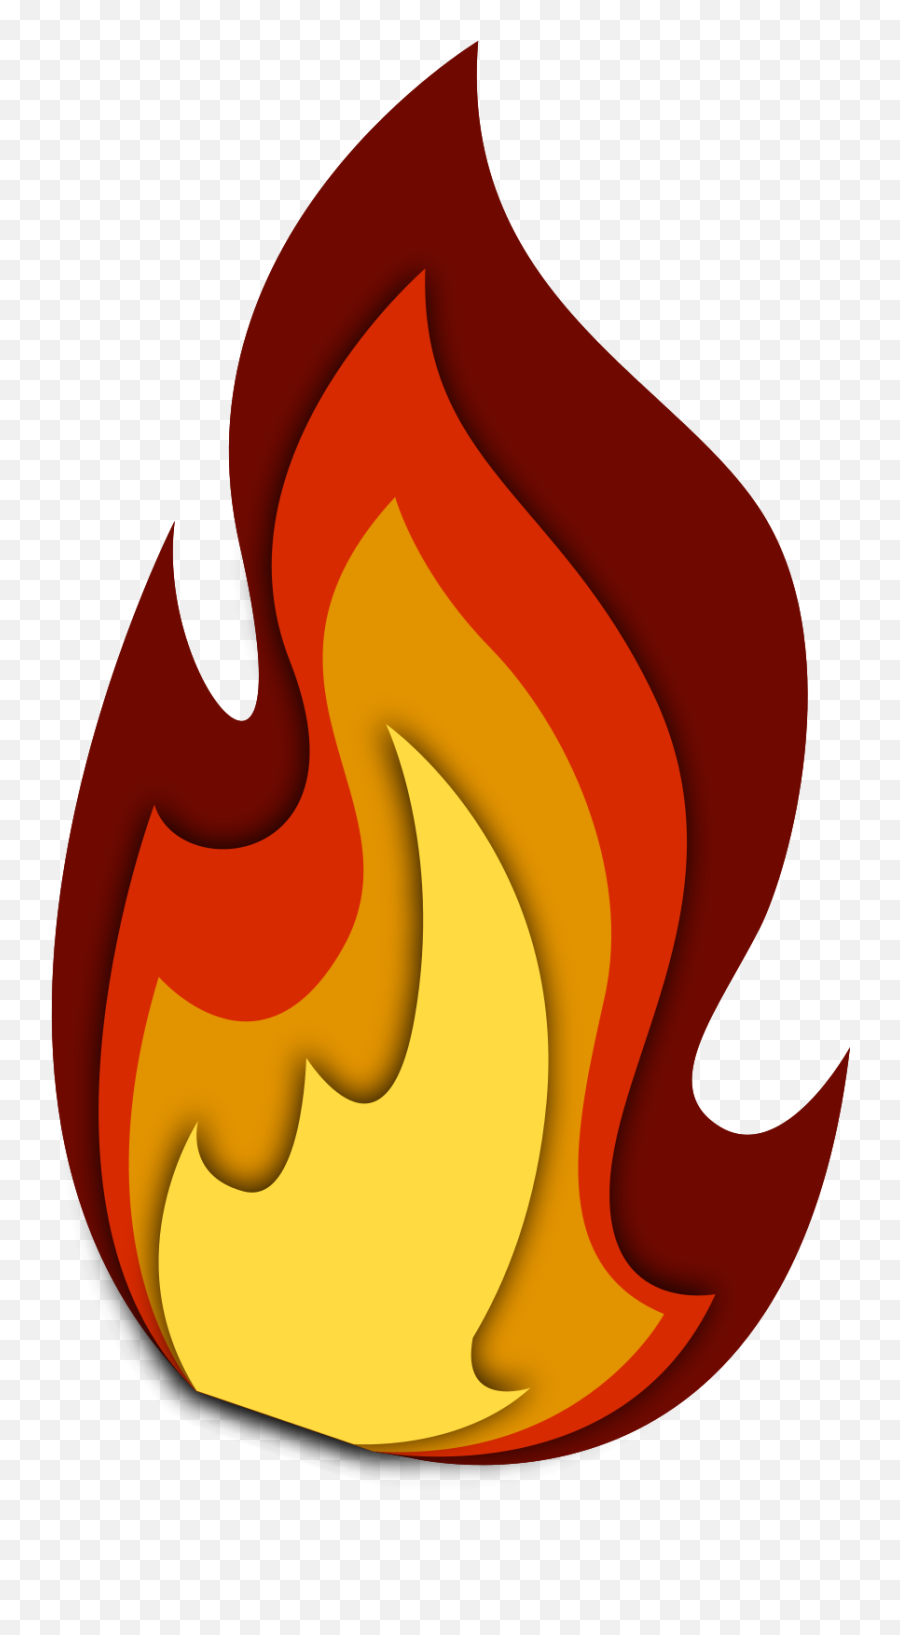 Free Fire 1188564 Png With Transparent Background - Vertical Emoji,Fire Texture Png